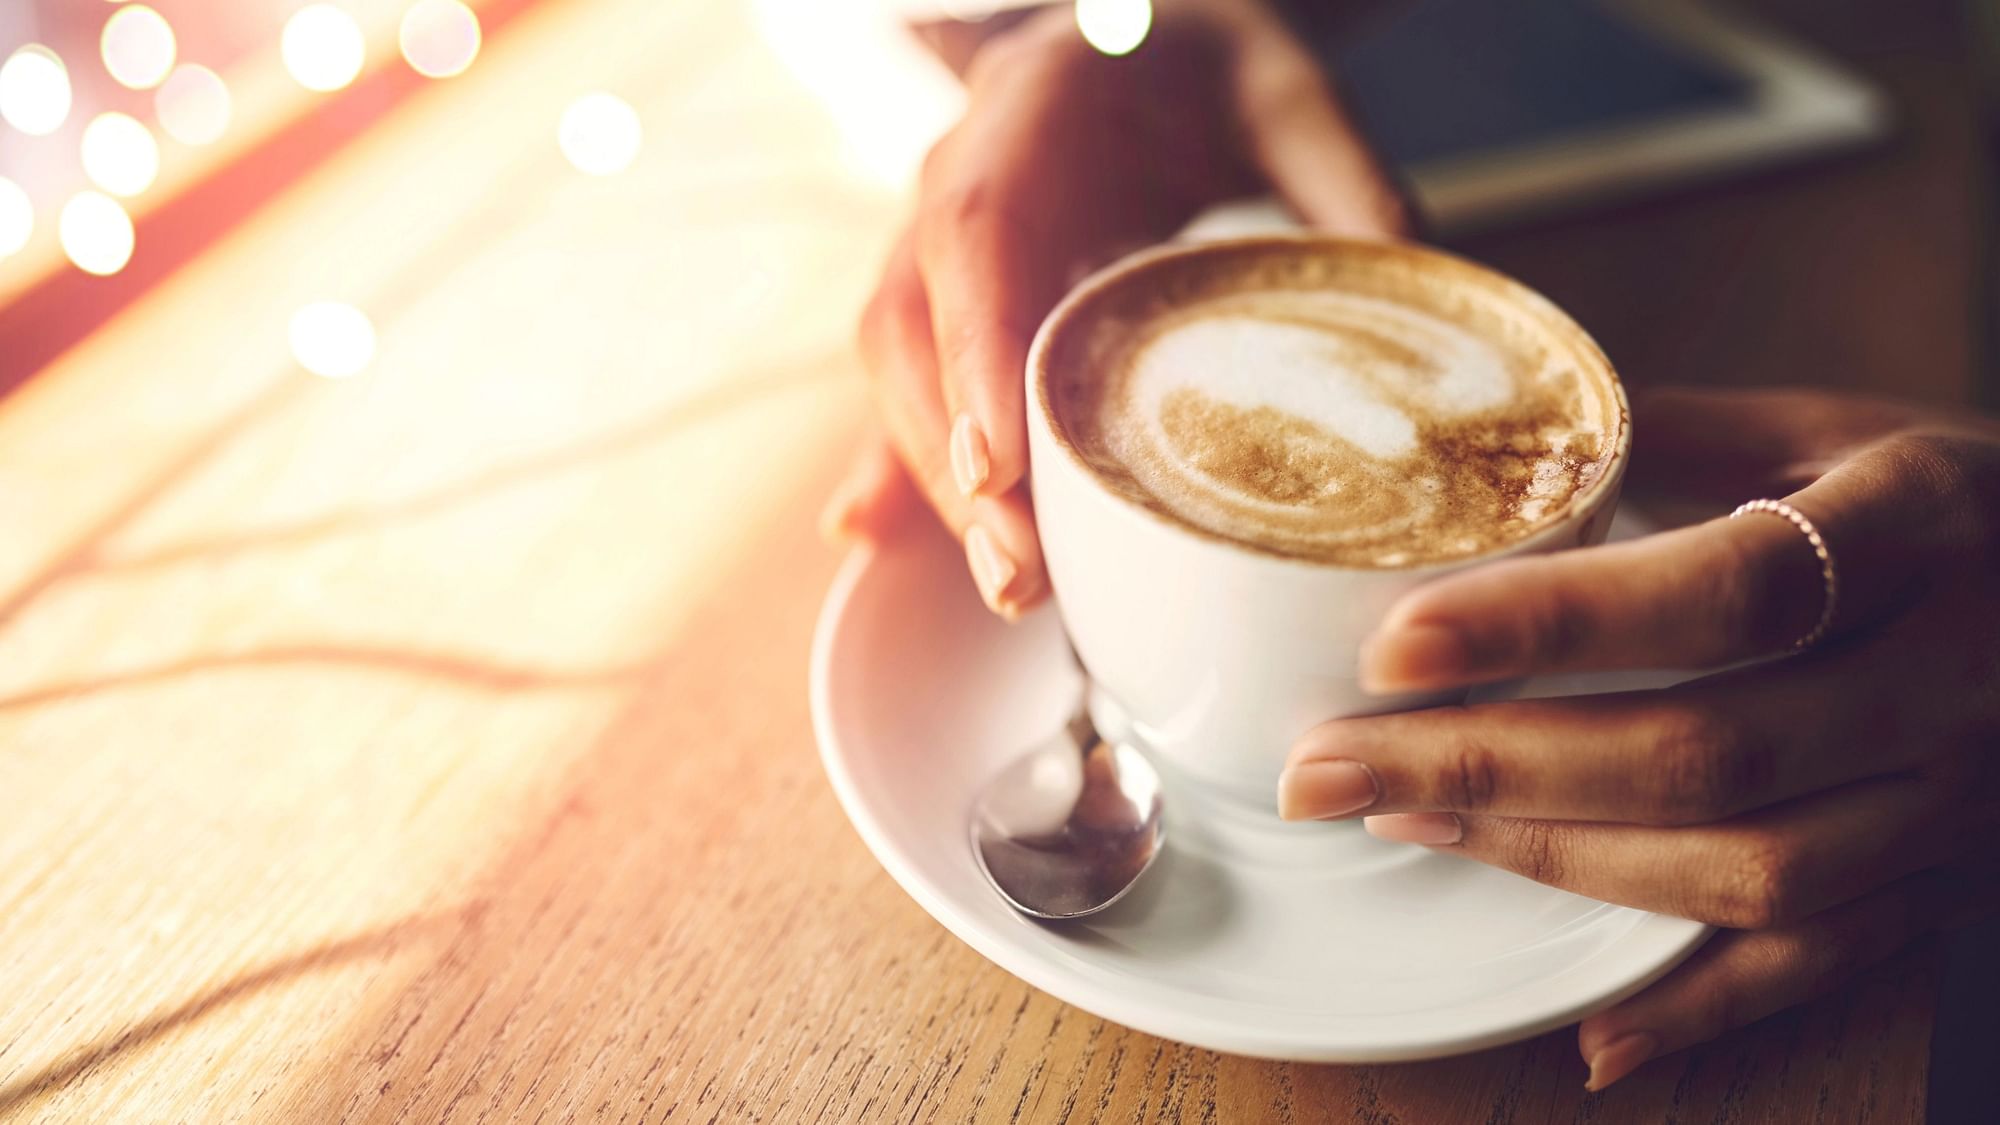 A new study says that drinking coffee may help enhance athletic performance